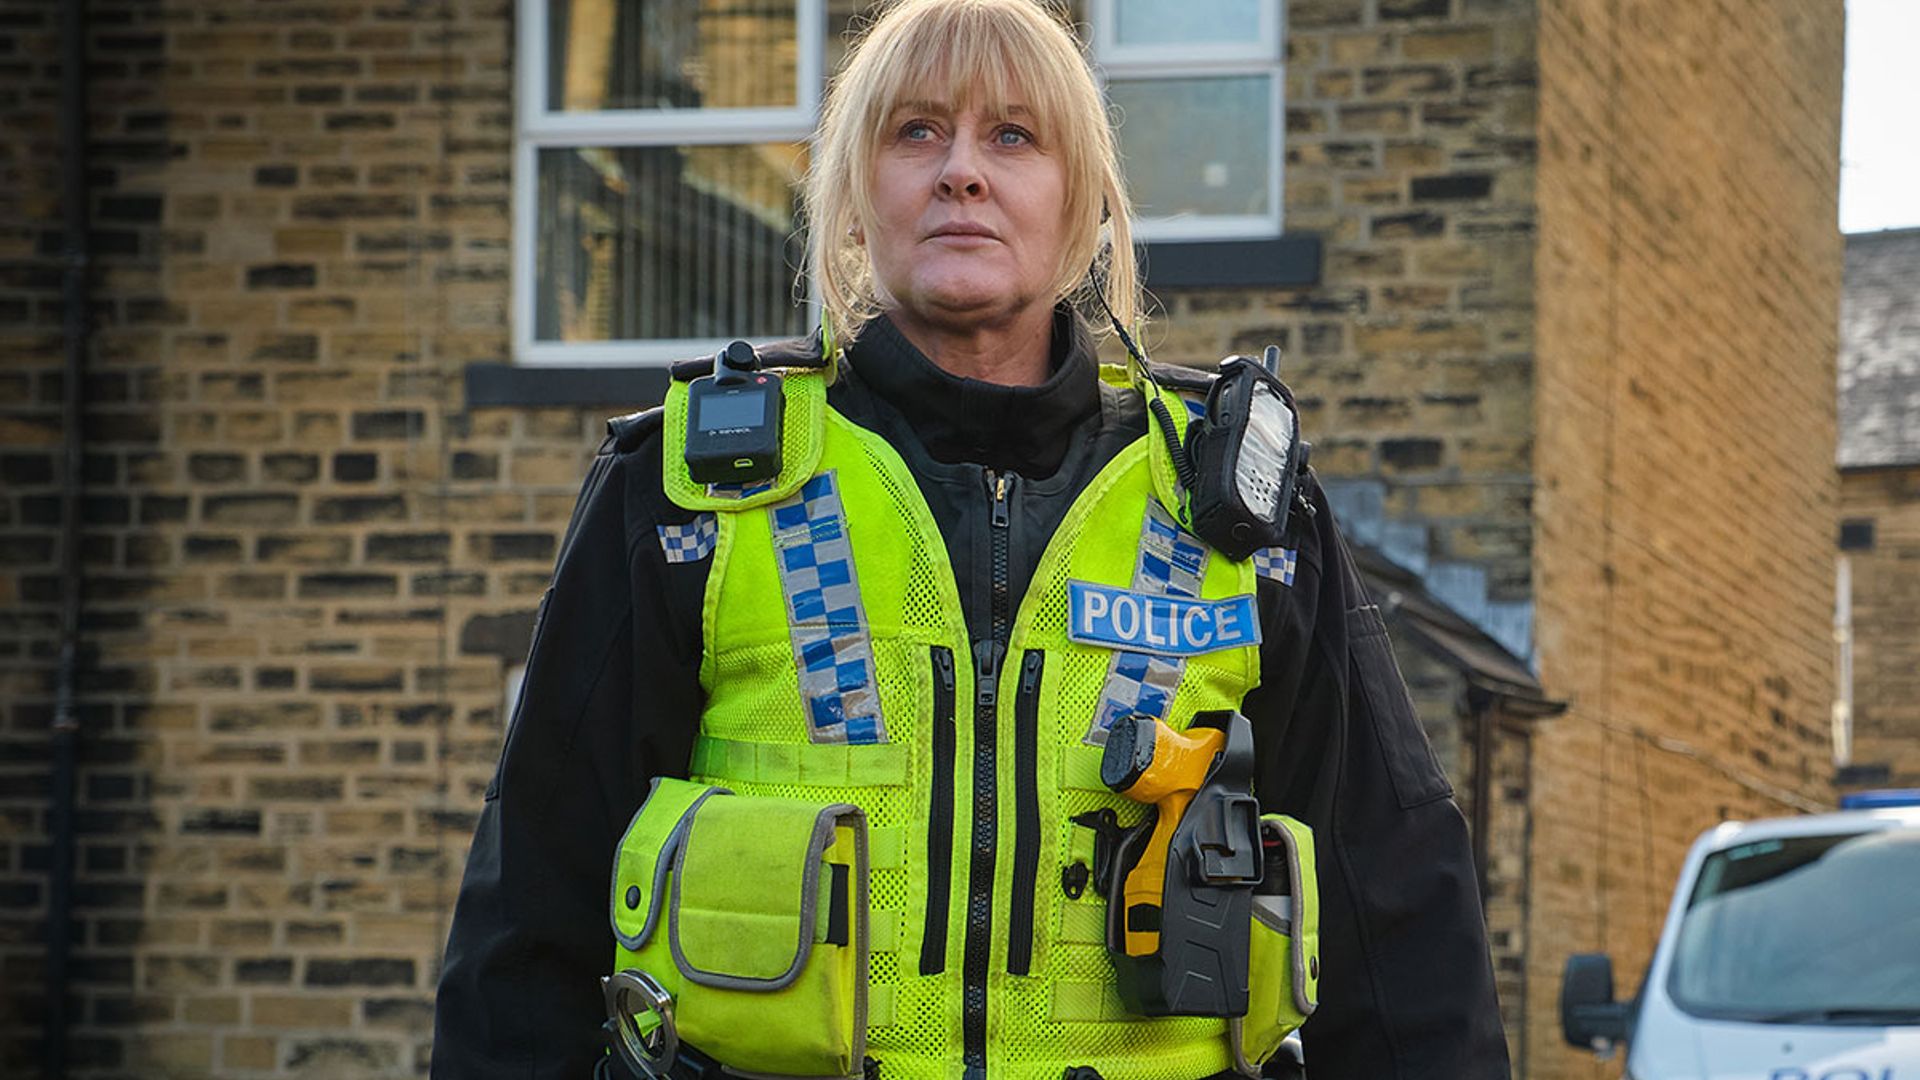 happy valley sarah lancashire shy out of spotlight